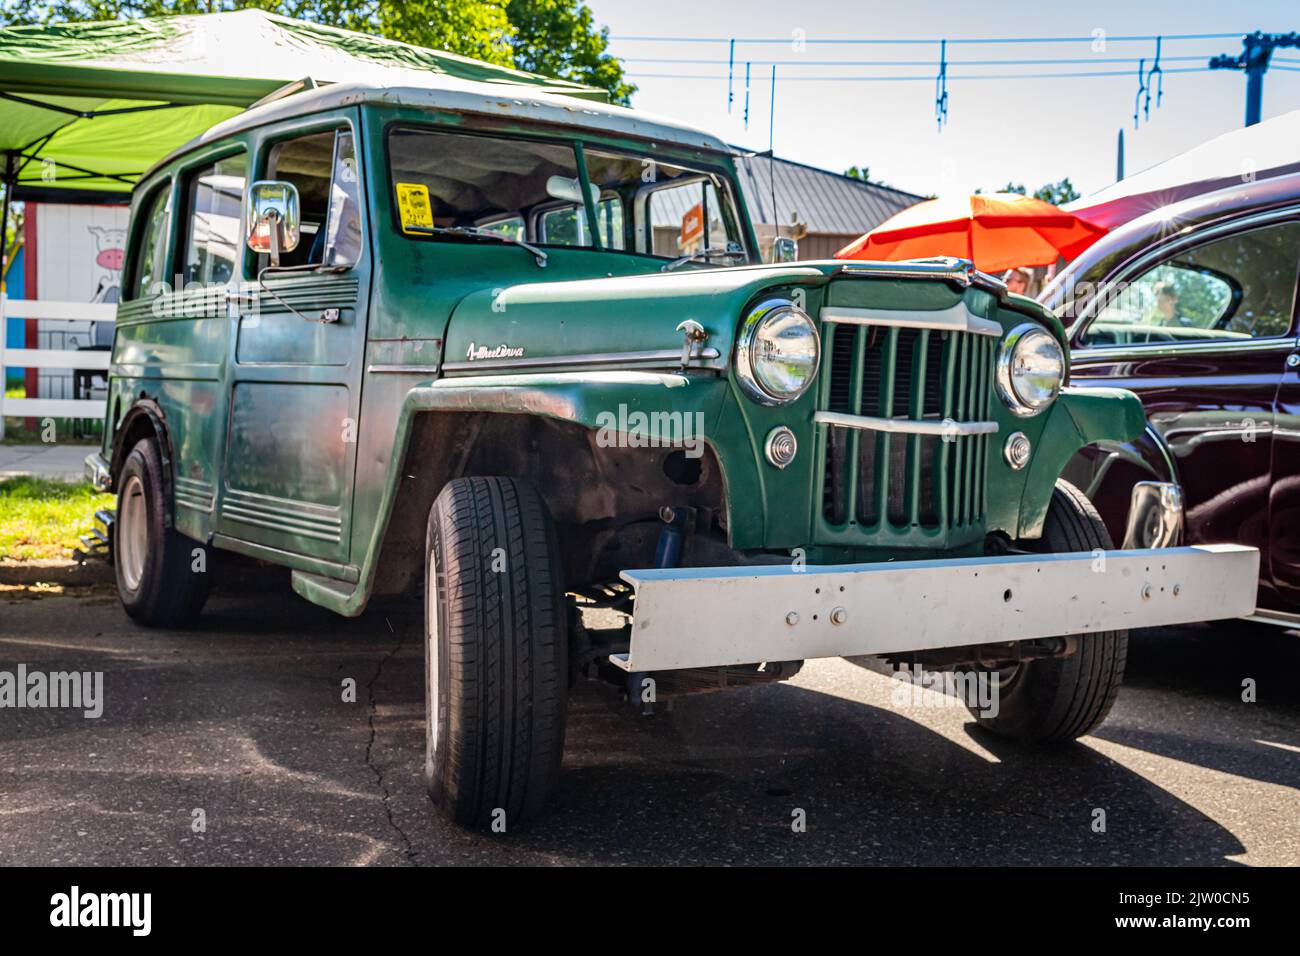 Falcon Heights, MN - June 17, 2022: Low perspective front corner view of a 1954 Willys Overland Station Wagon at a local car show. Stock Photo